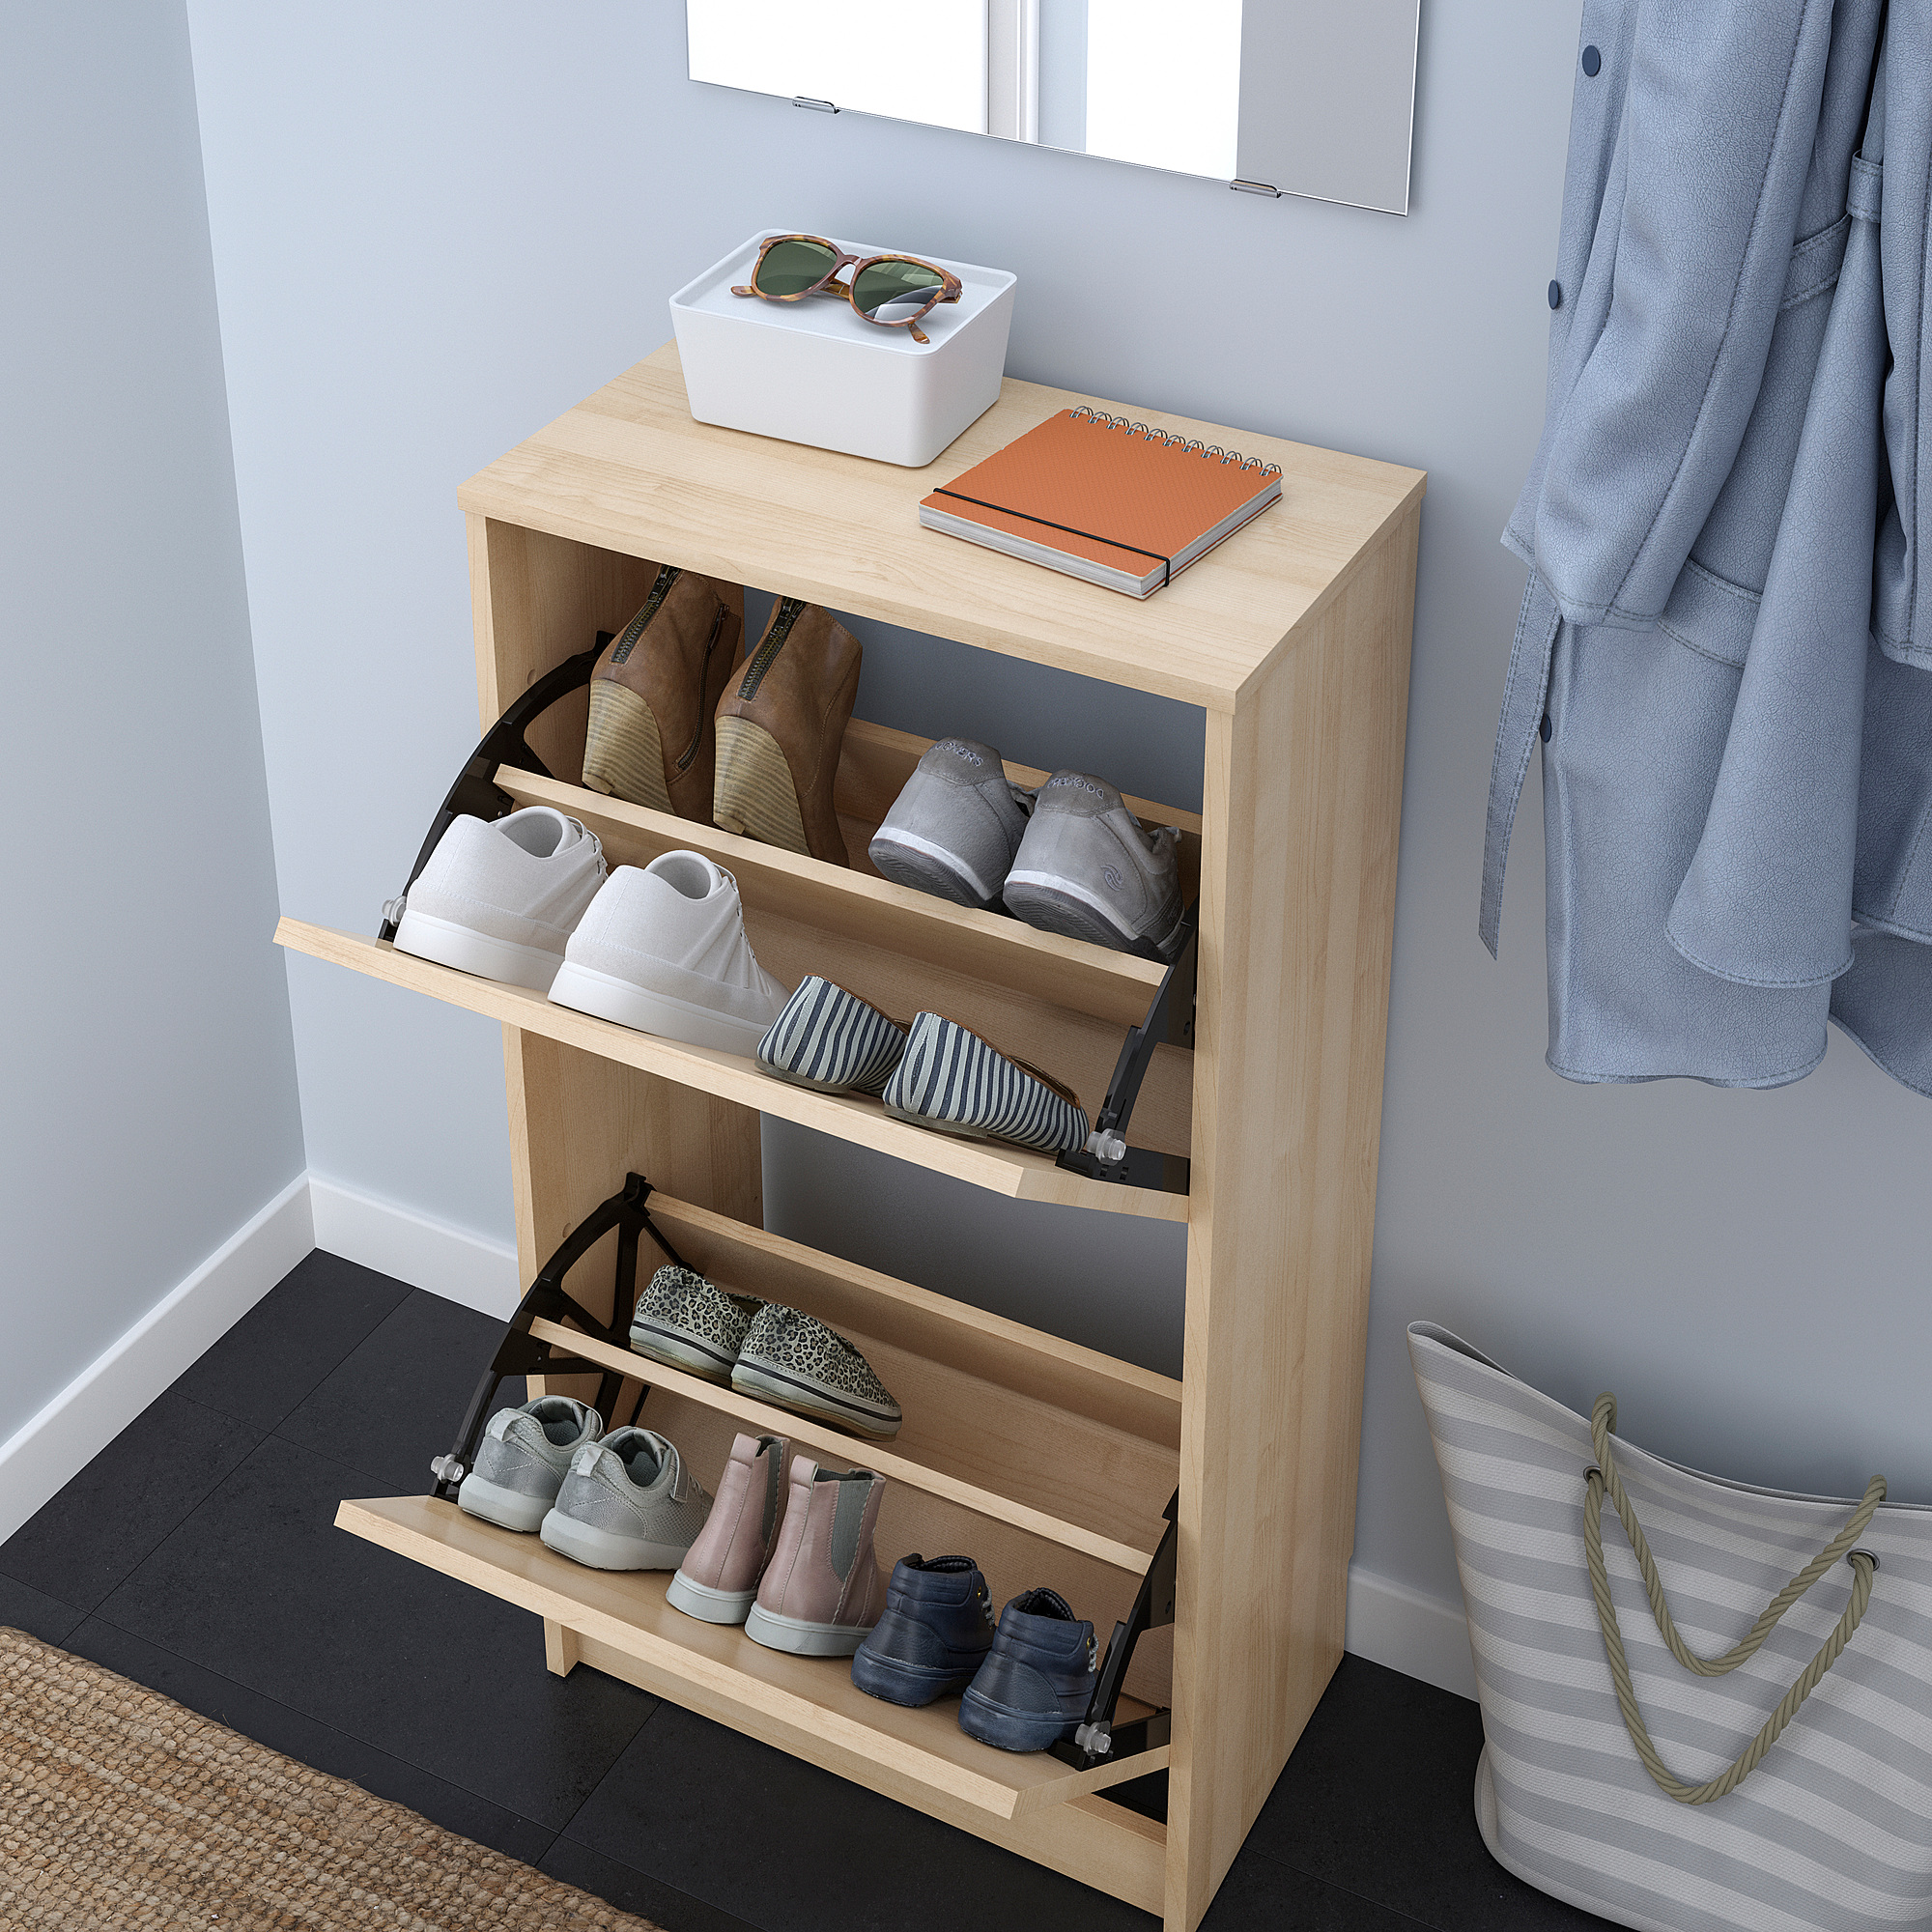 BISSA shoe cabinet with 2 compartments